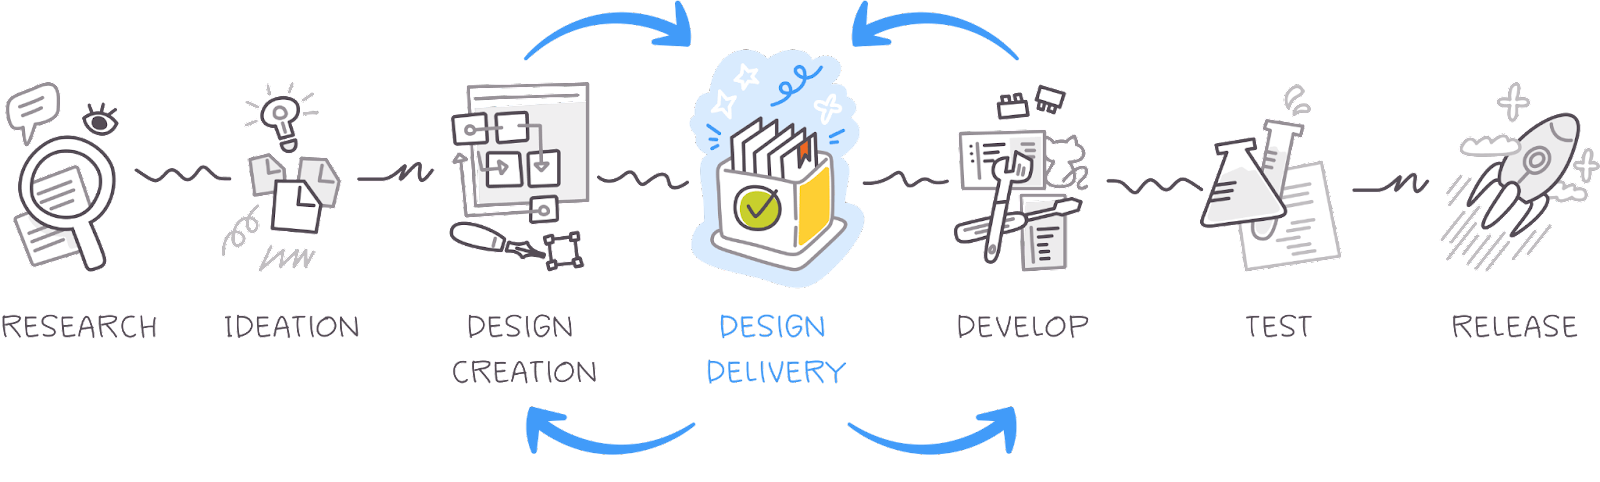 design delivery stage